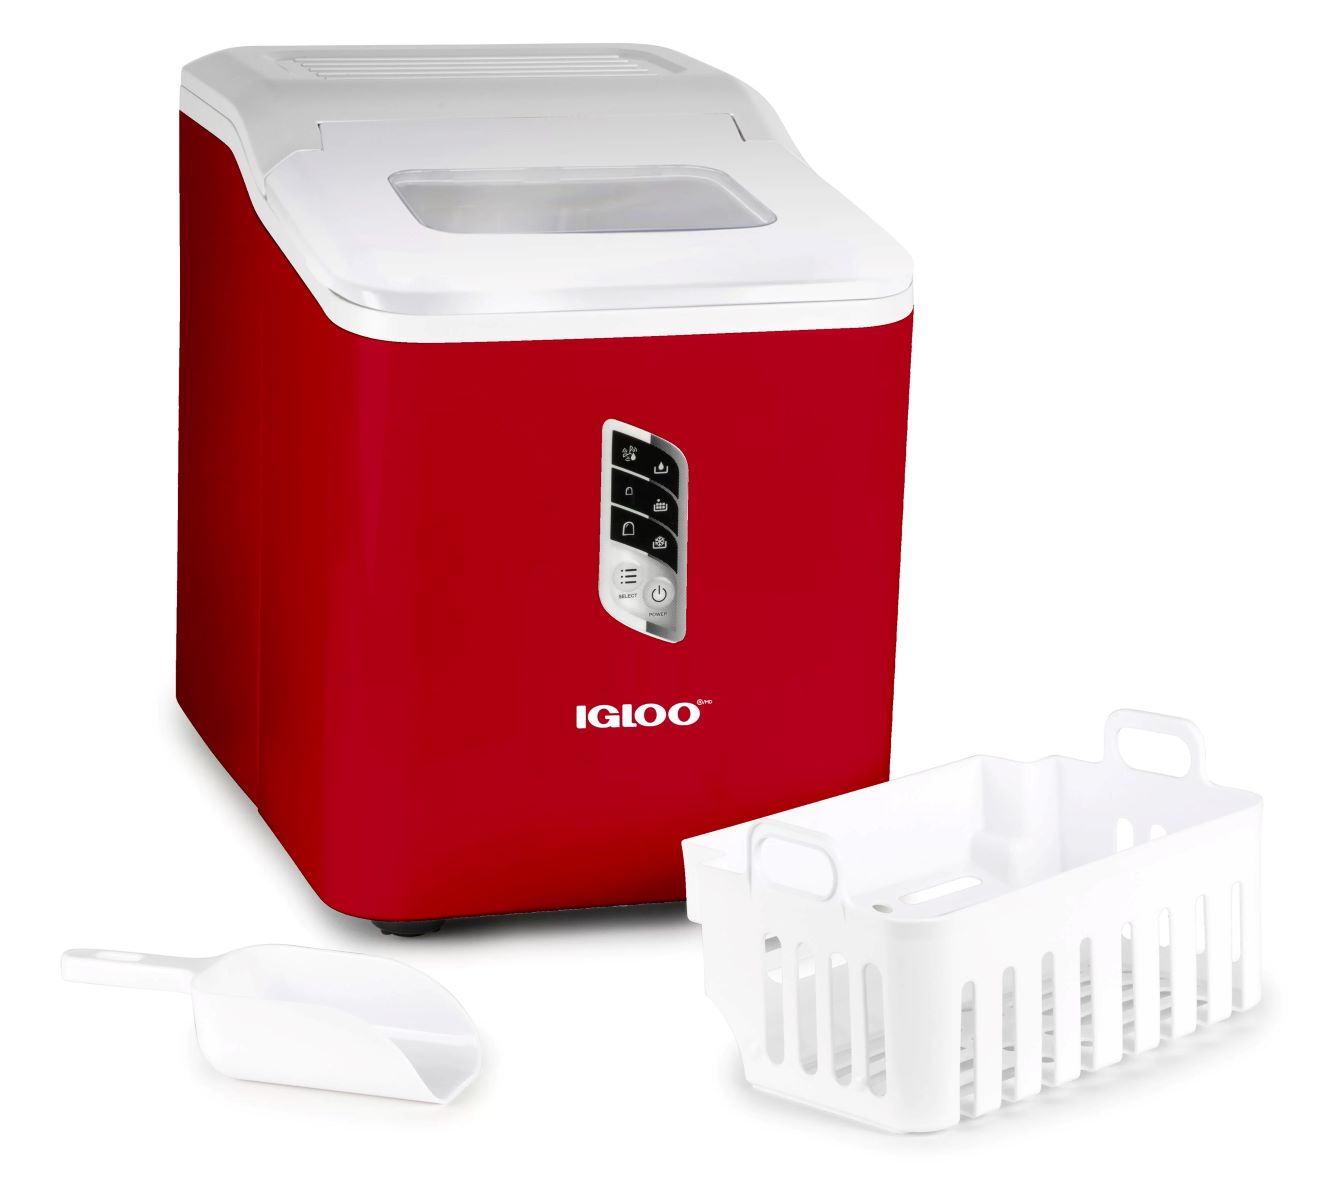 Discover The Revolutionary Igloo Self-Cleaning 26-Pound Ice Maker - A Game-Changer In Ice Making!